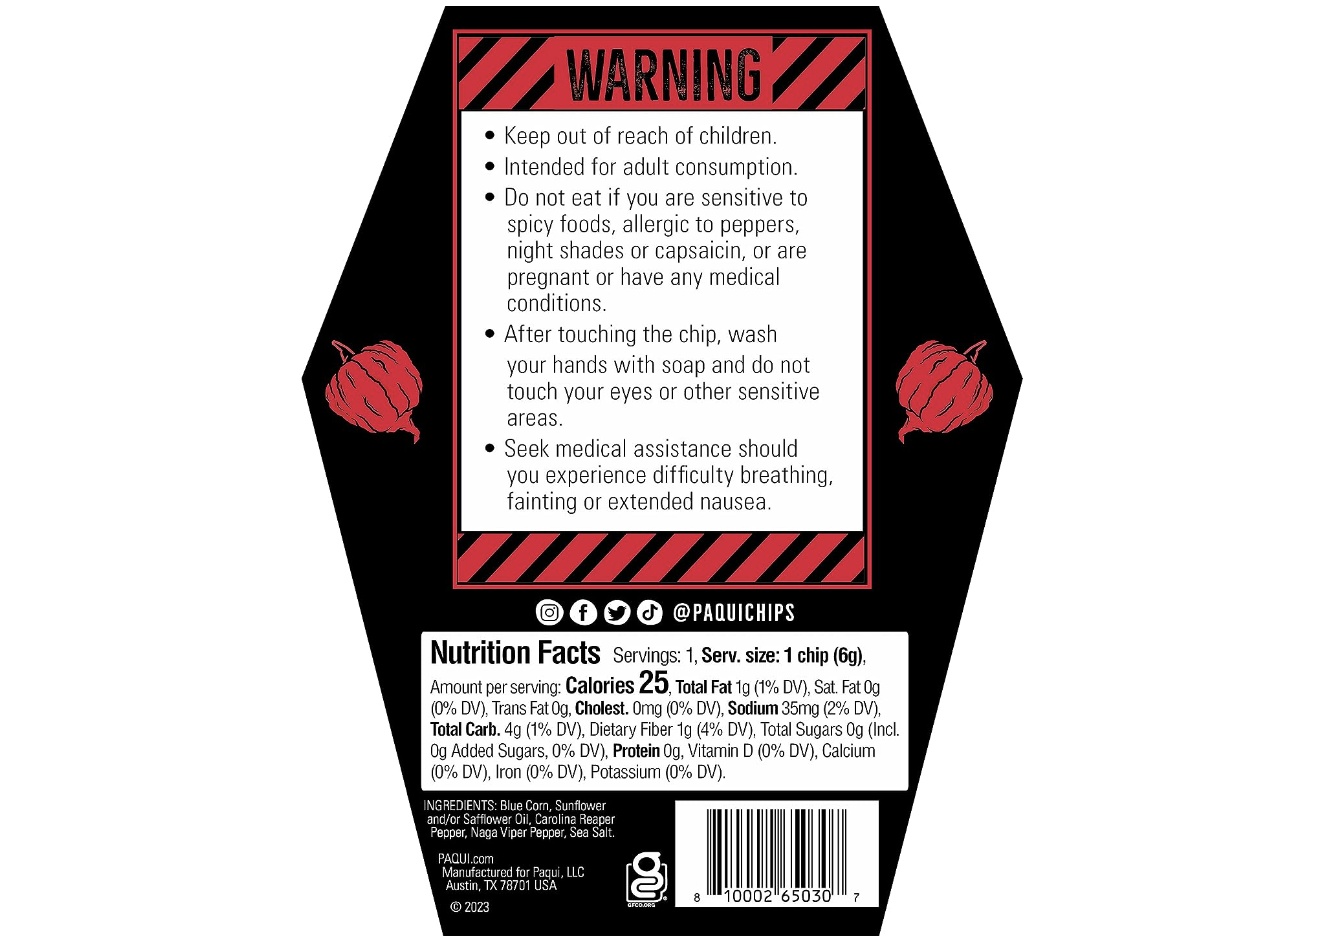 Read the warning label for the One Chip Challenge, Paqui's extra spicy  tortilla chip 